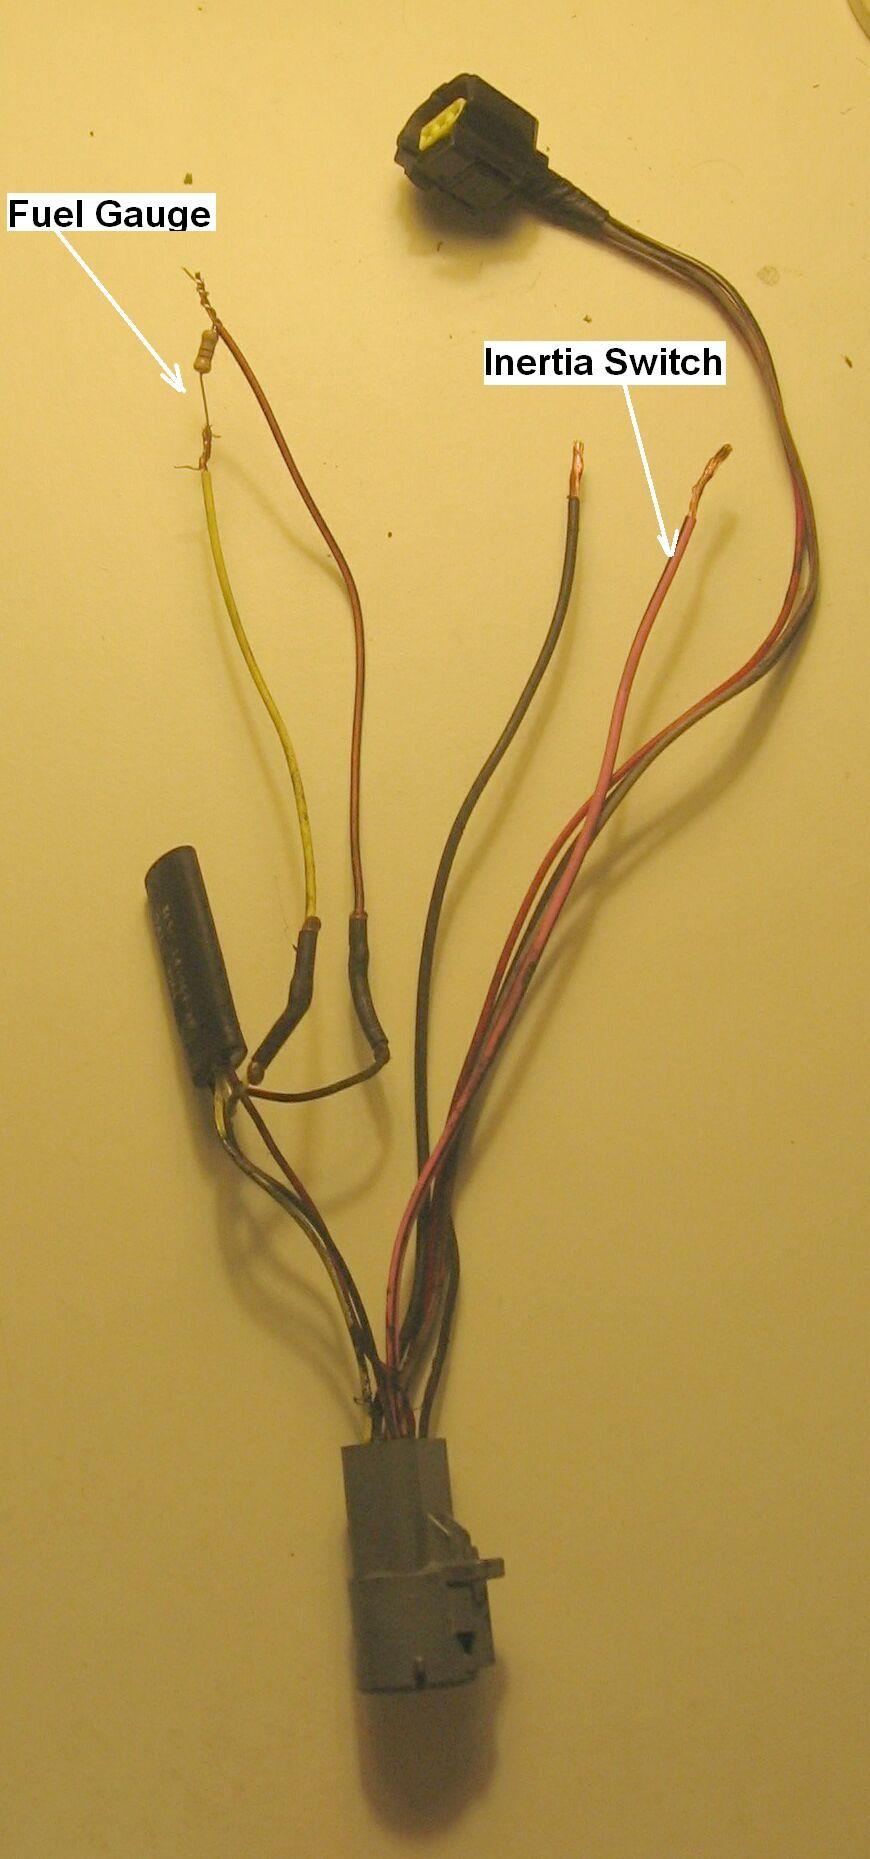 The inertia Switch wire is Pink/Black.